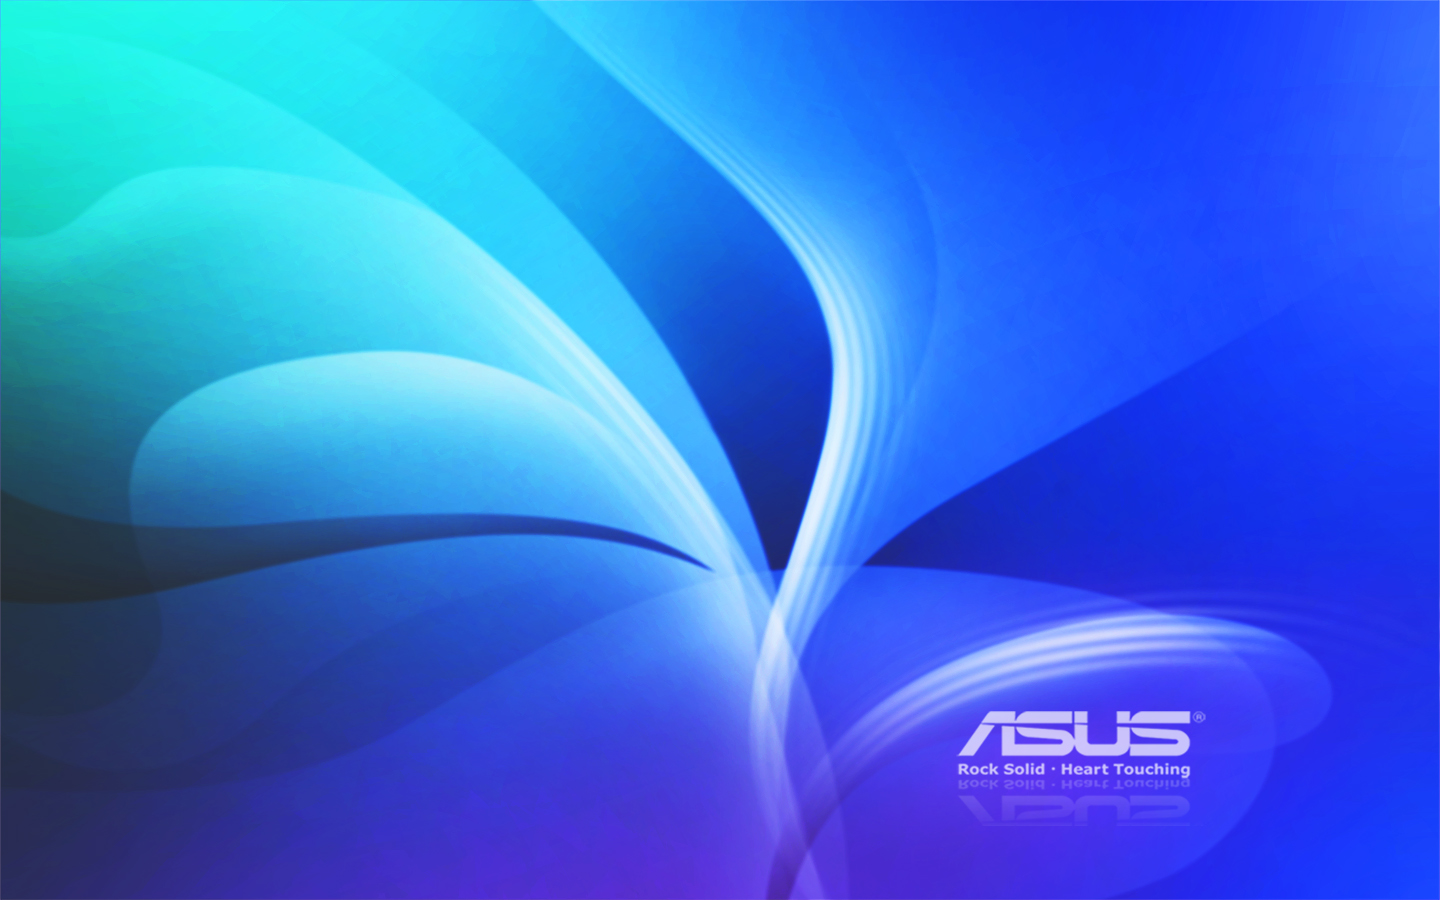 Asus Background